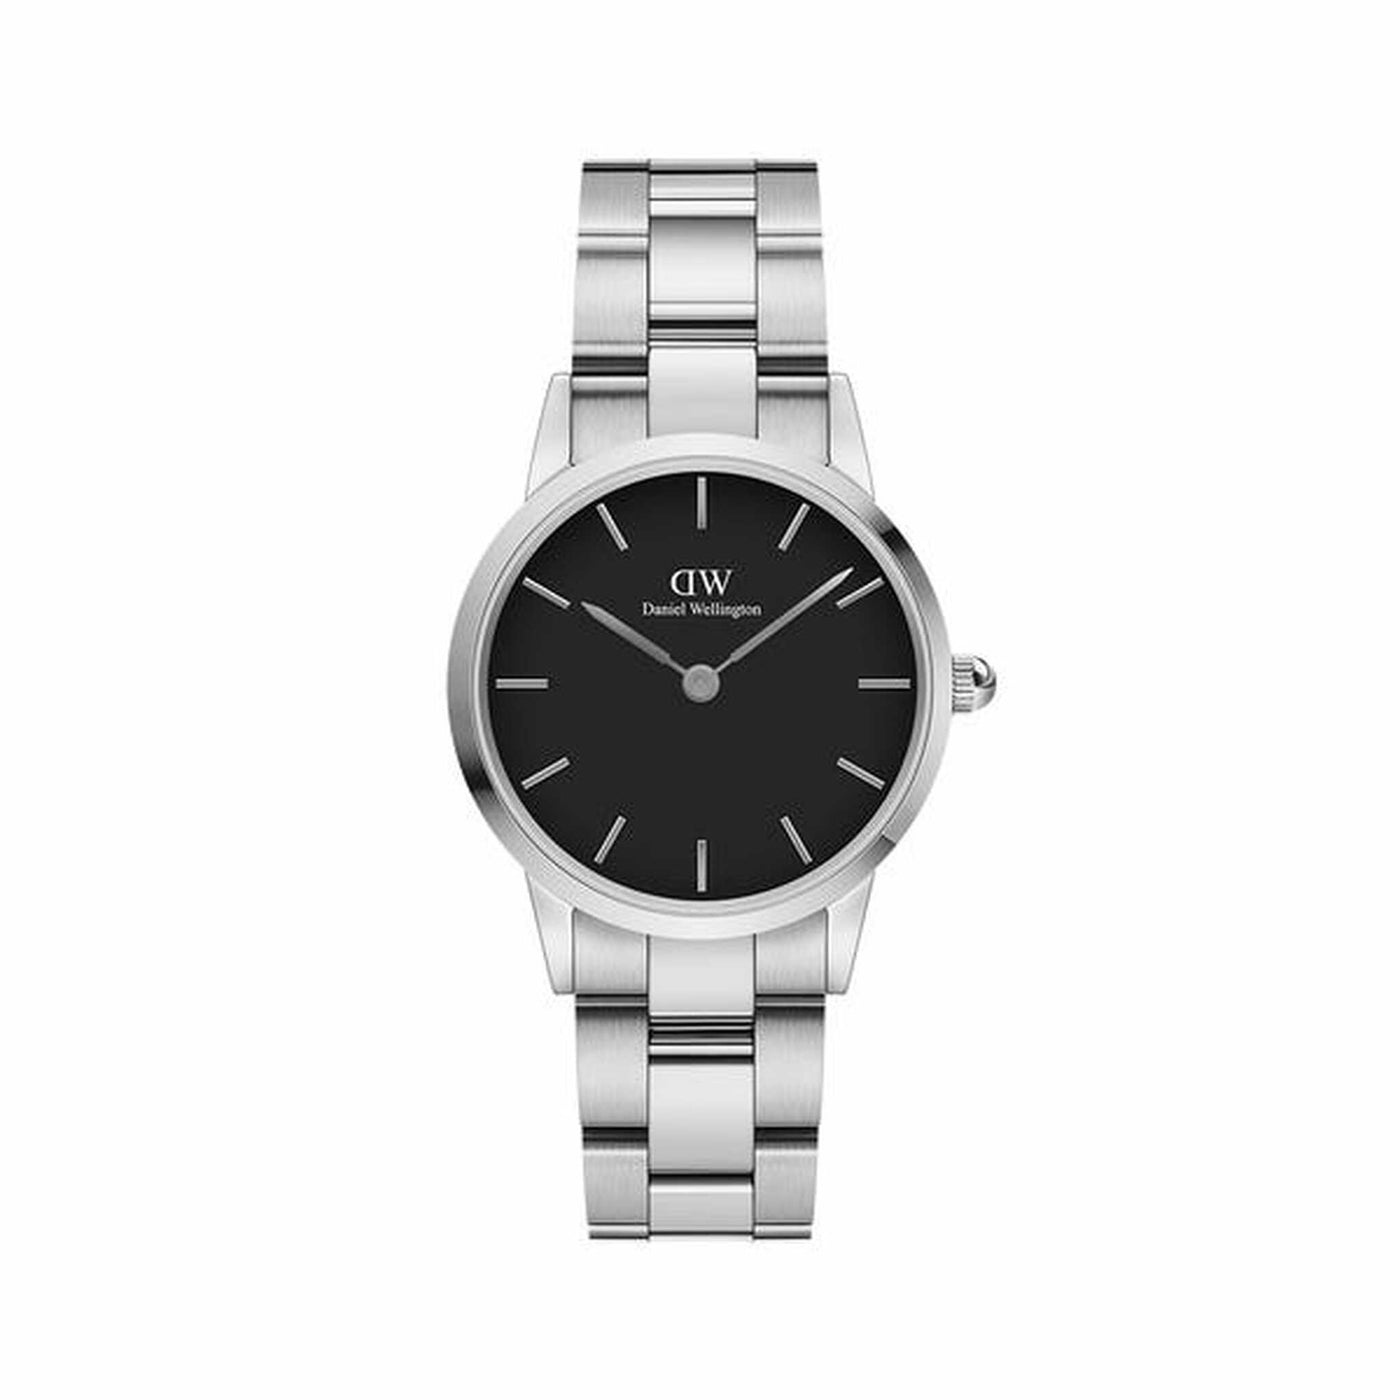 Iconic Link 28mm Stainless Steel Watch - DW00100208